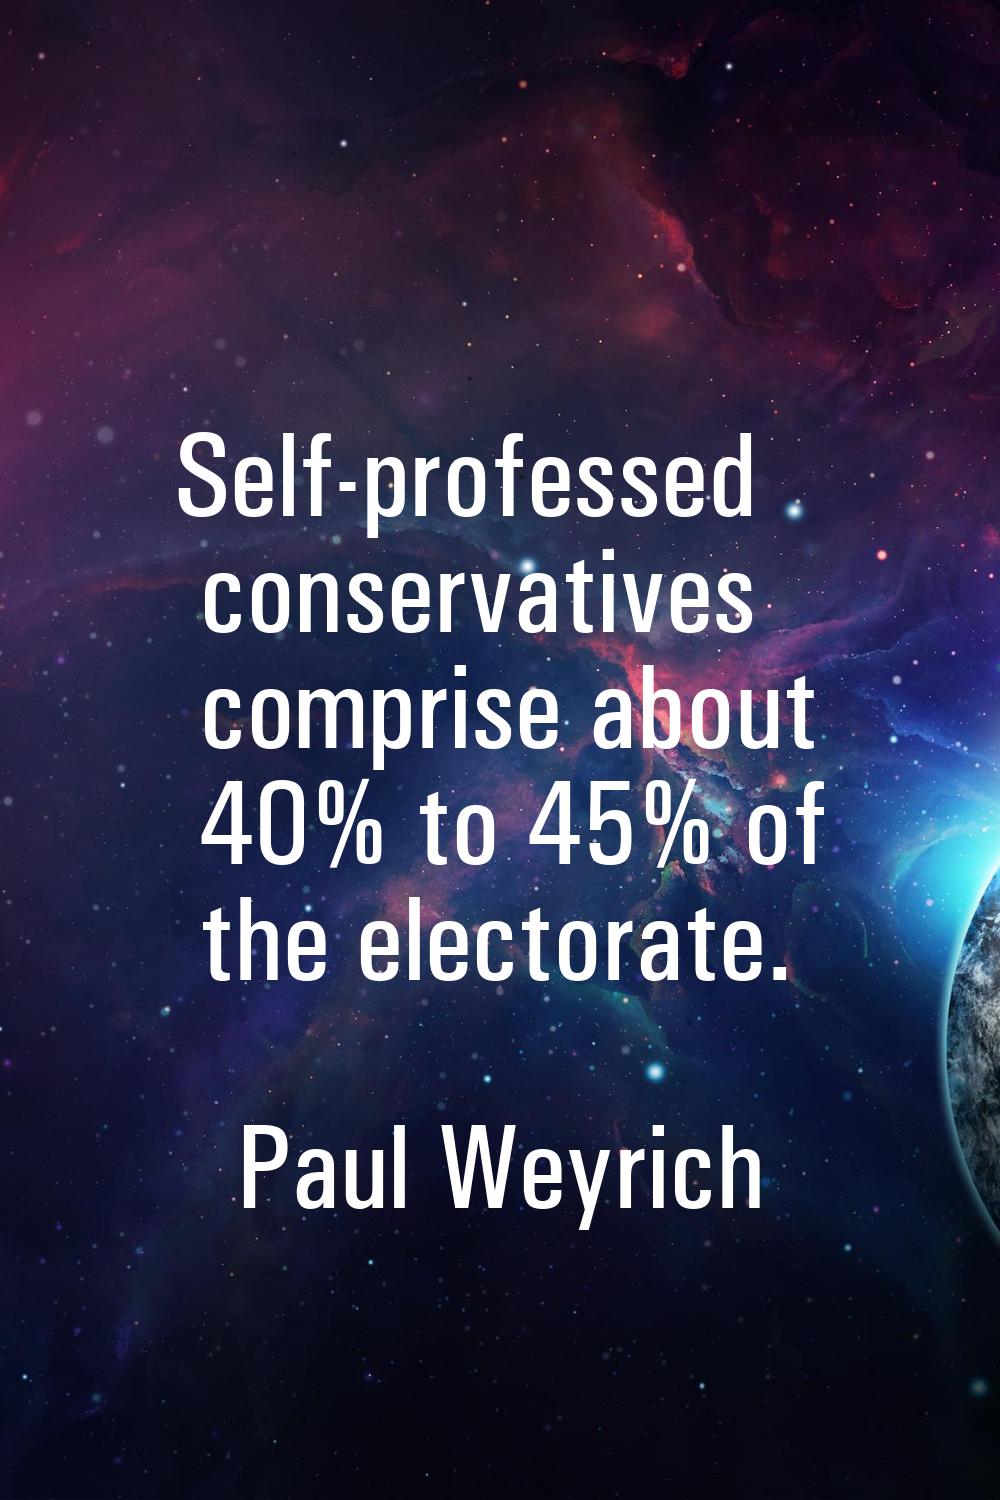 Self-professed conservatives comprise about 40% to 45% of the electorate.